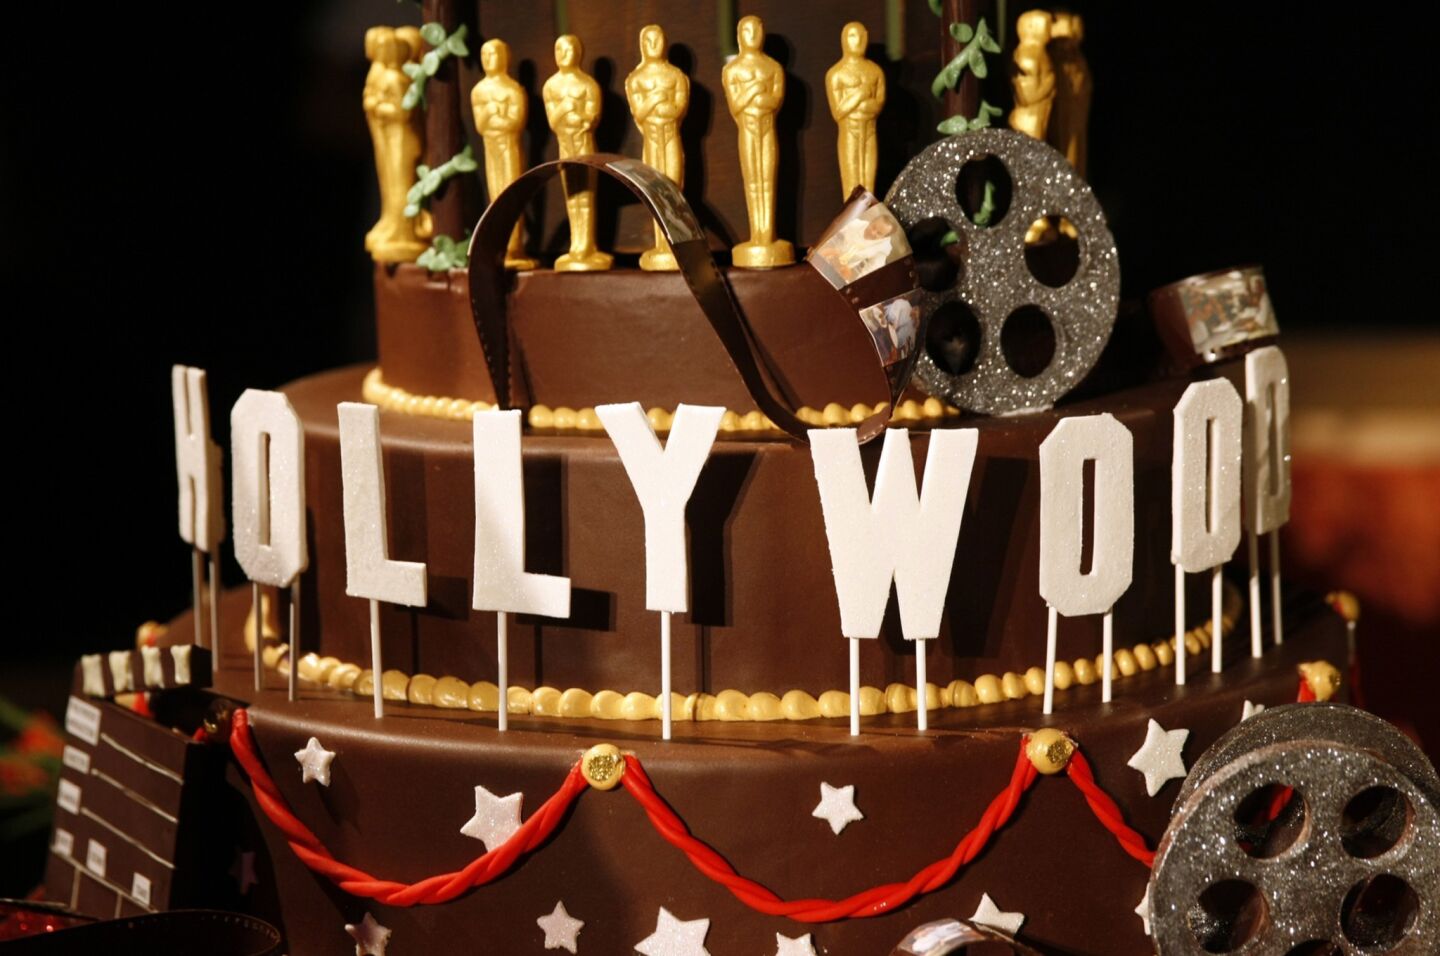 A large chocolate cake is one of the desserts that will be offered at the Governors Ball by Wolfgang Puck's pastry team.